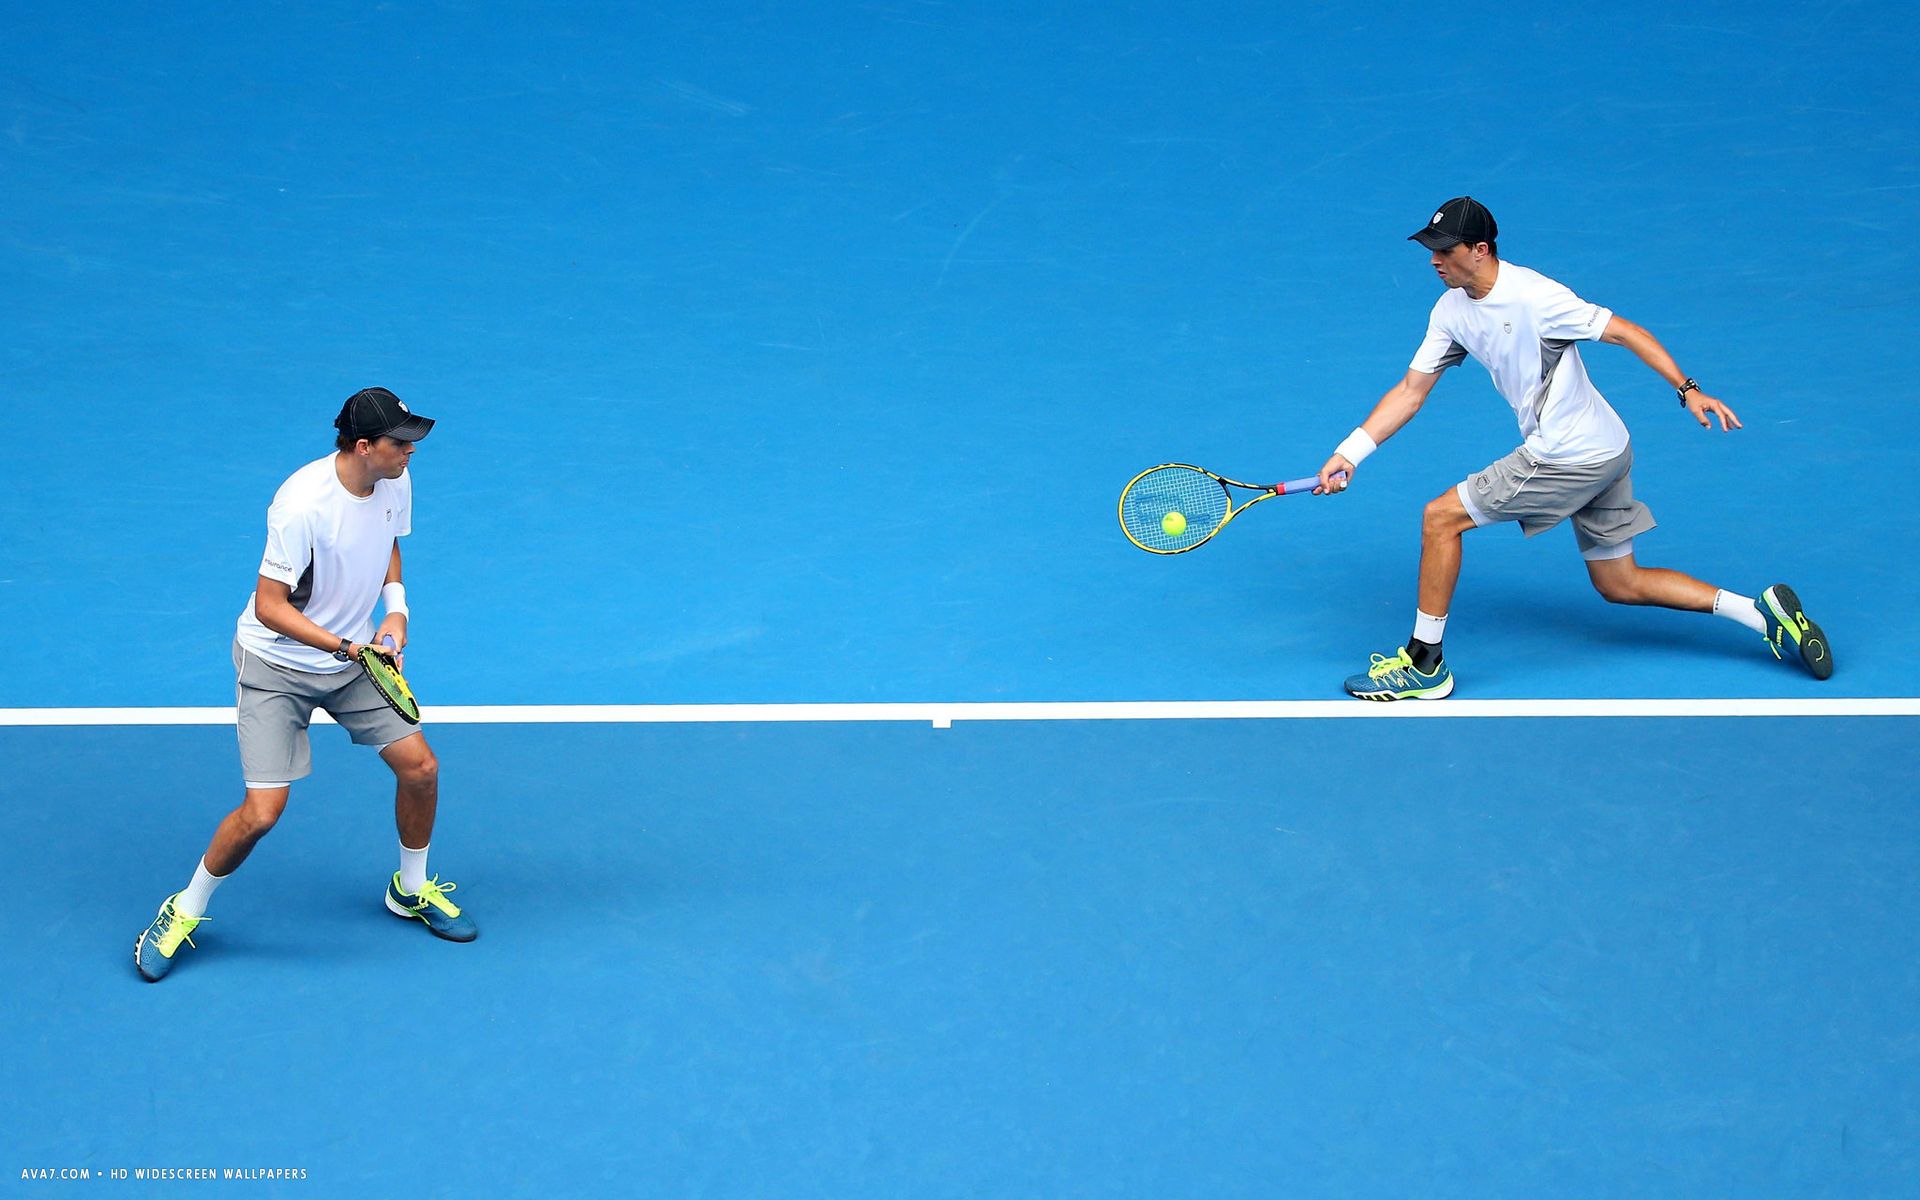 bryan brothers tennis players twins mike bob doubles hd widescreen wallpaper